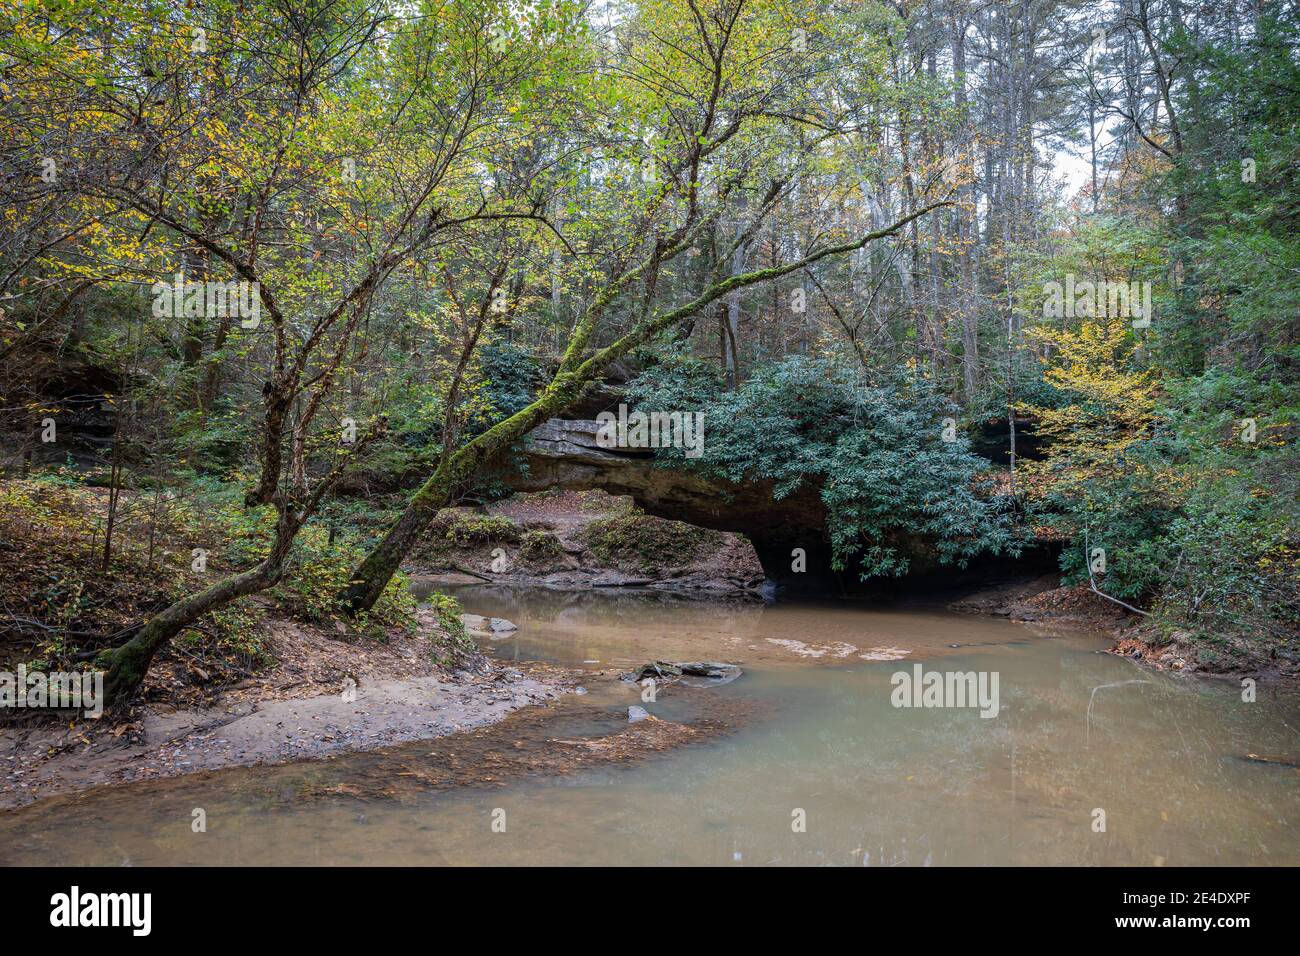 A calming forest scene in the Red River Gorge of Eastern Kentucky. Stock Photo